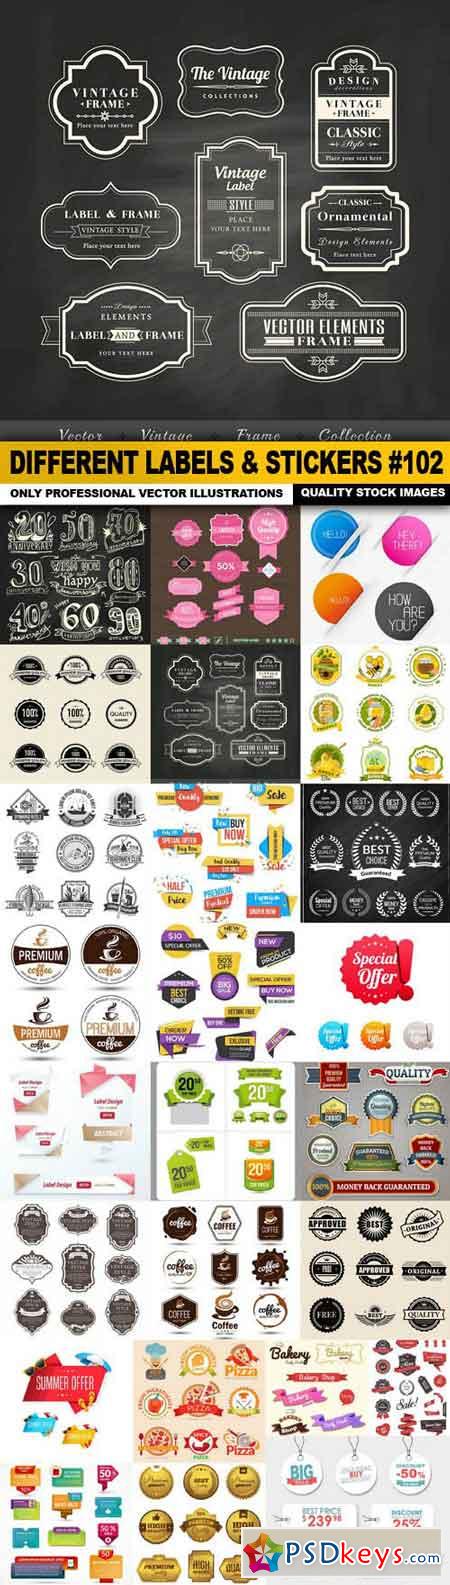 Different Labels & Stickers #102 - 25 Vector